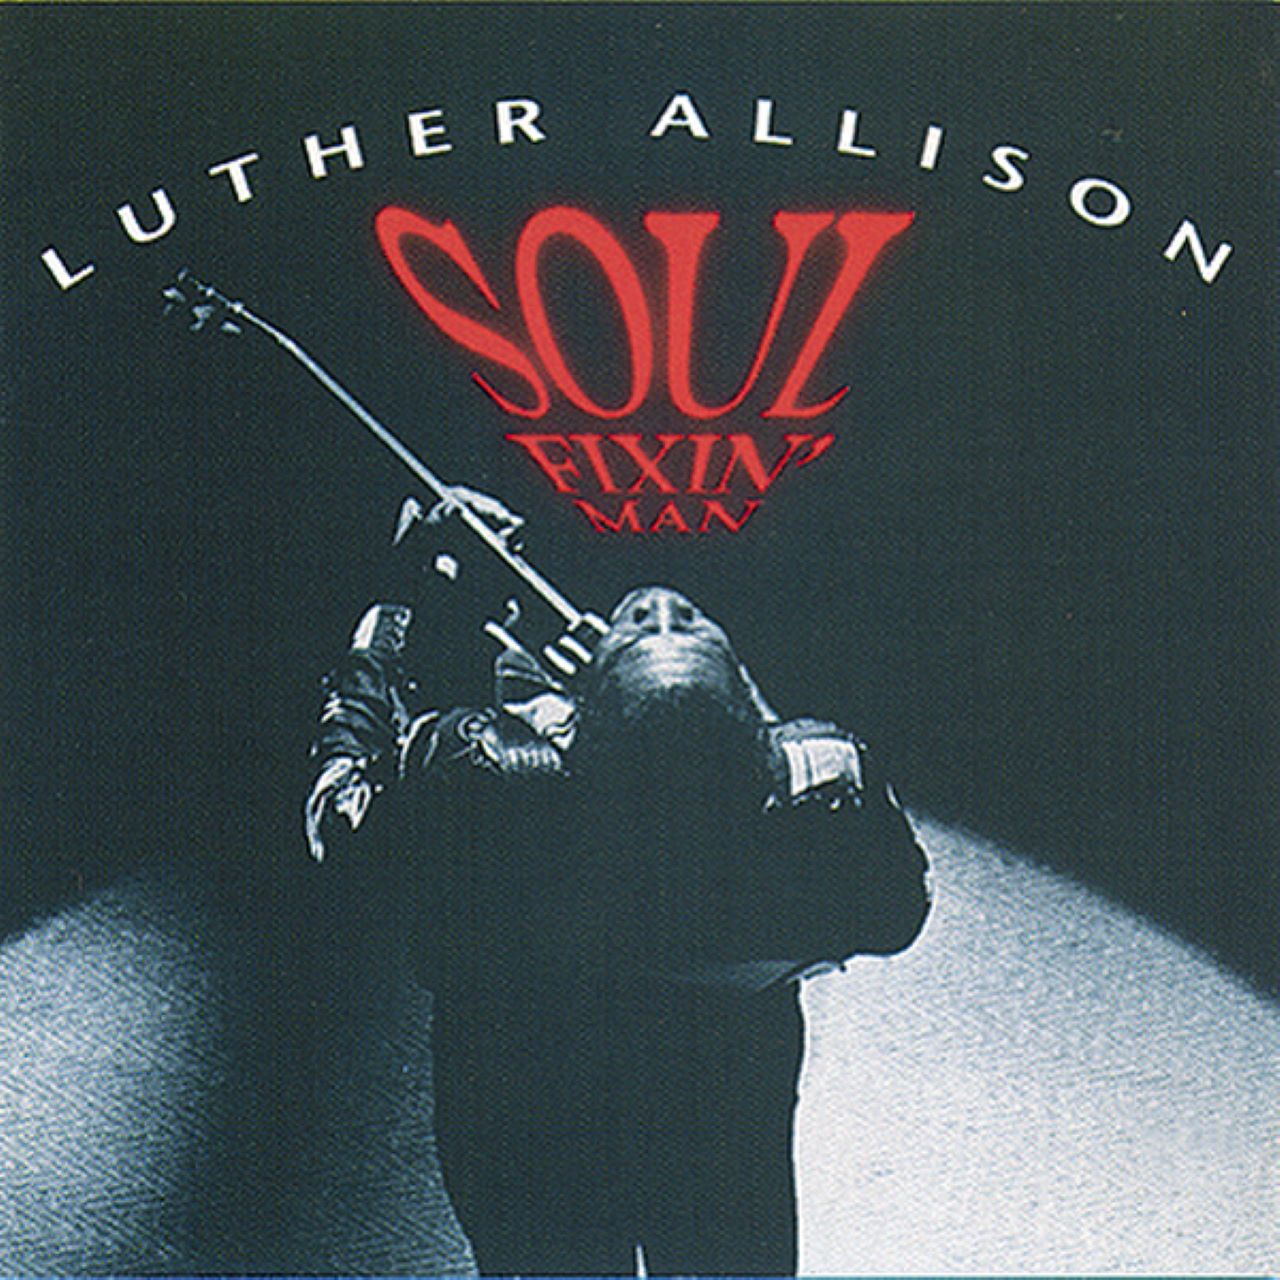 Luther Allison – Soul Fixin’ Man cover album